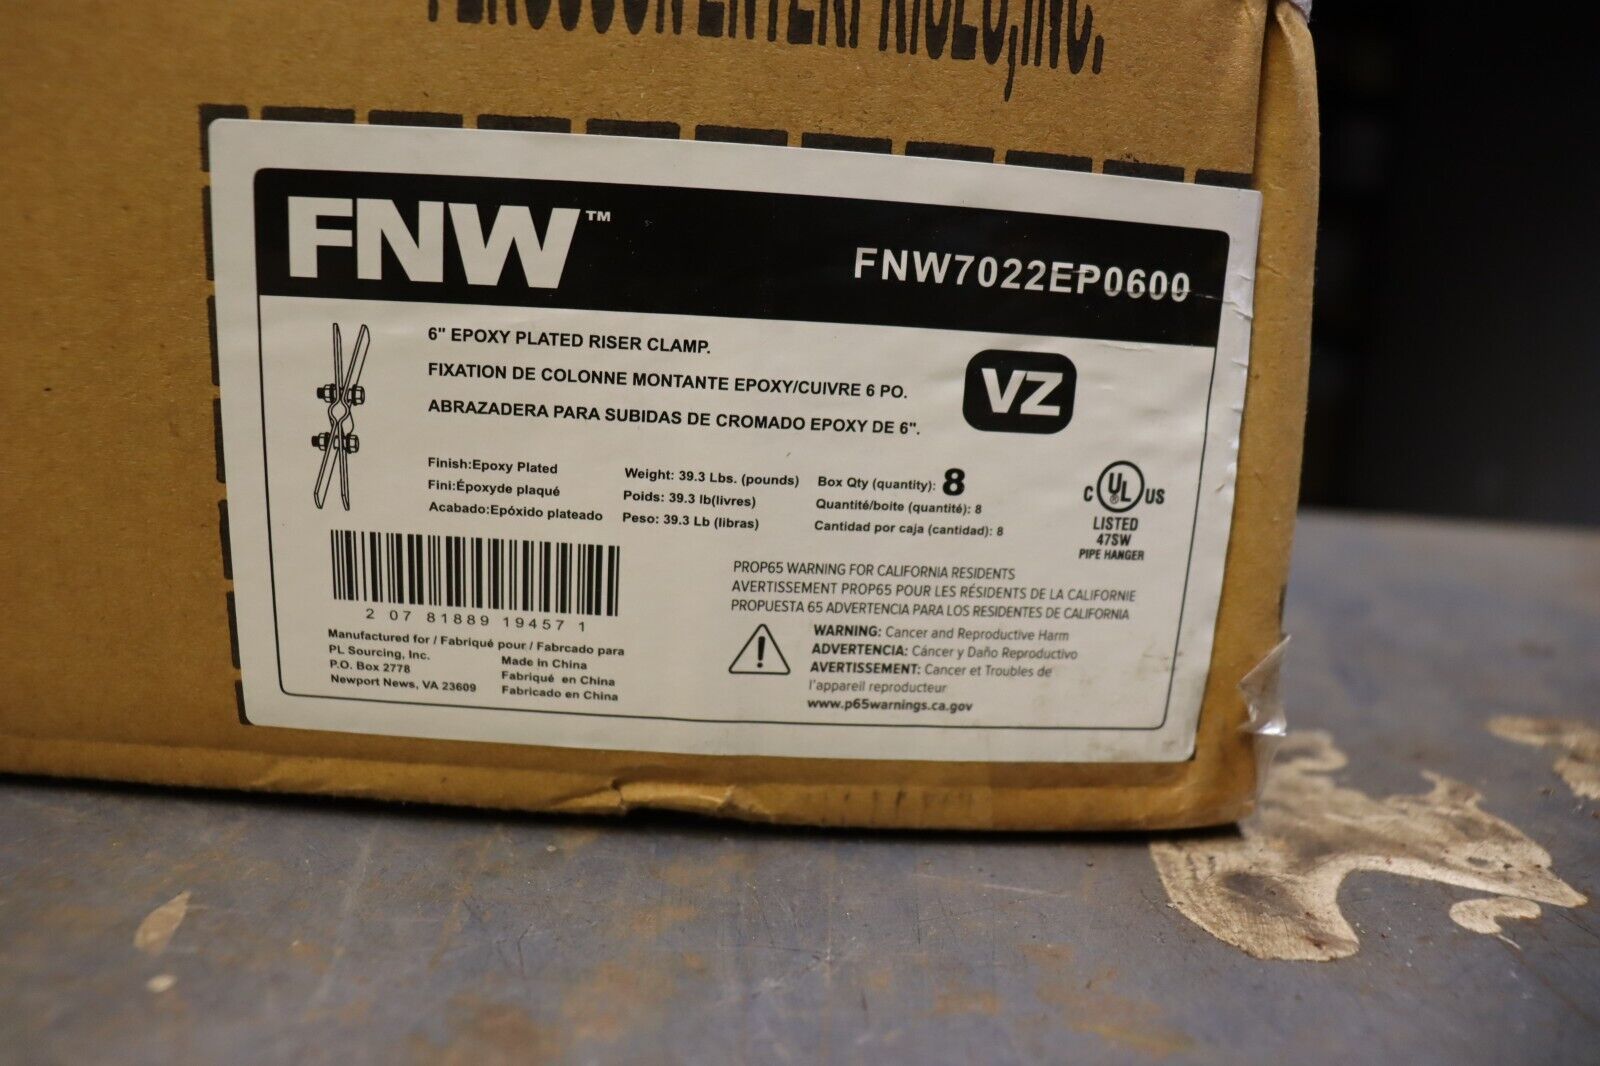 Riser Clamp 6 Inch Epoxy Plated FNW FNW7022EP0600